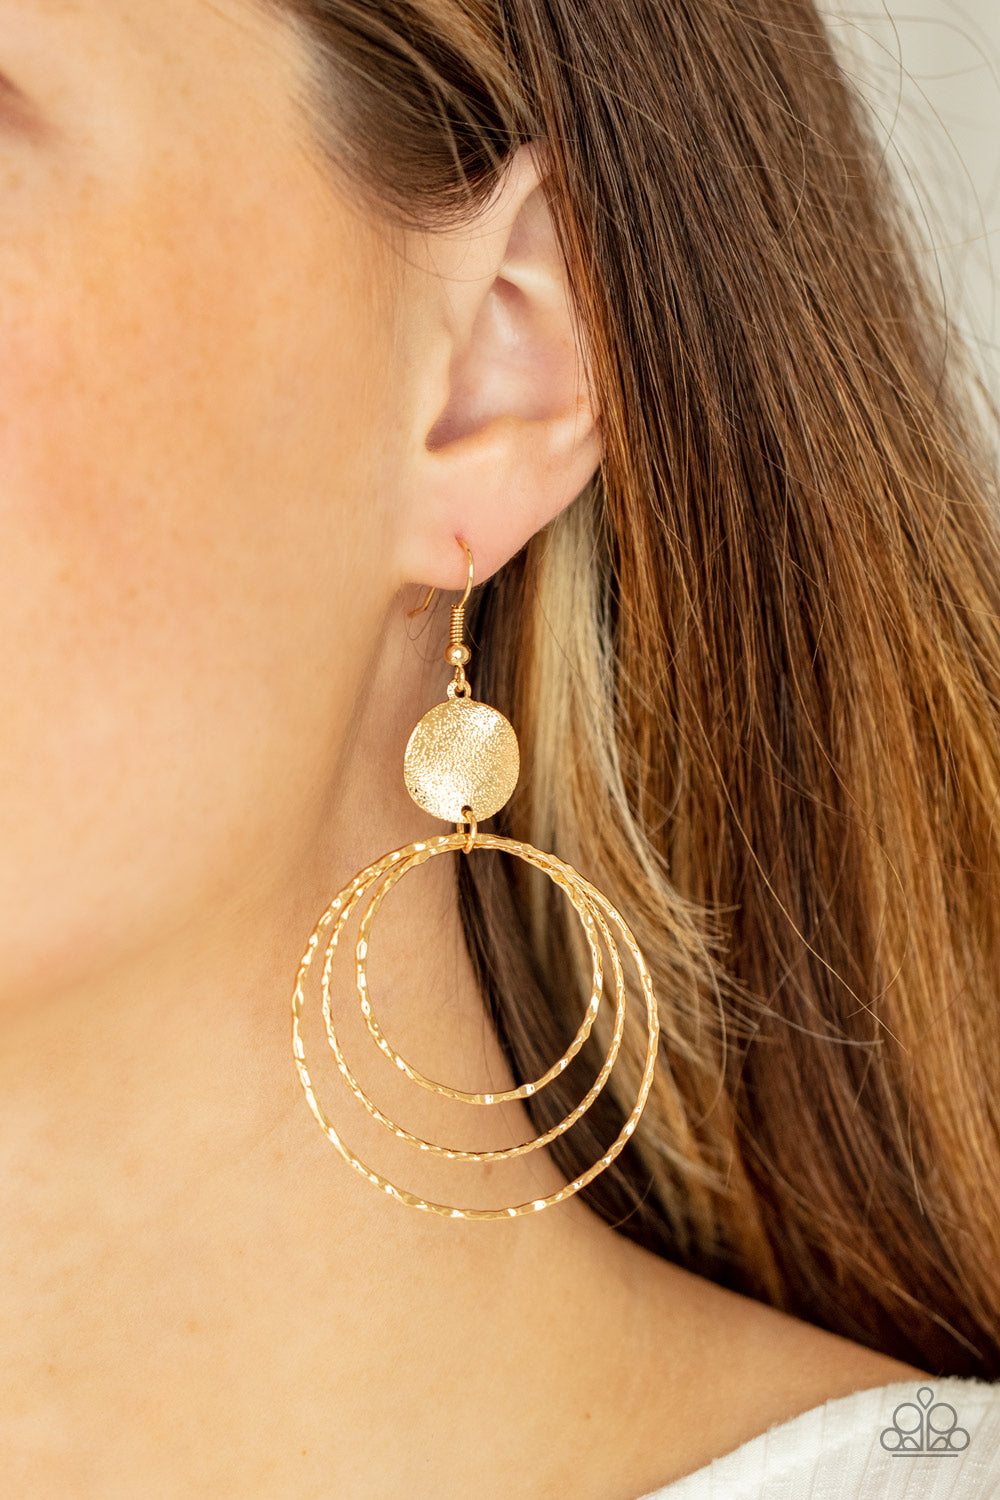 Paparazzi Accessories Universal Rehearsal - Gold Earrings a shimmery wavy gold disc links atop a collection of three delicately hammered gold rings in concentric sizes for an out-of-this-world finish. Earring attaches to a standard fishhook fitting.  Sold as one pair of earrings.  Paparazzi Jewelry is lead and nickel free so it's perfect for sensitive skin too!